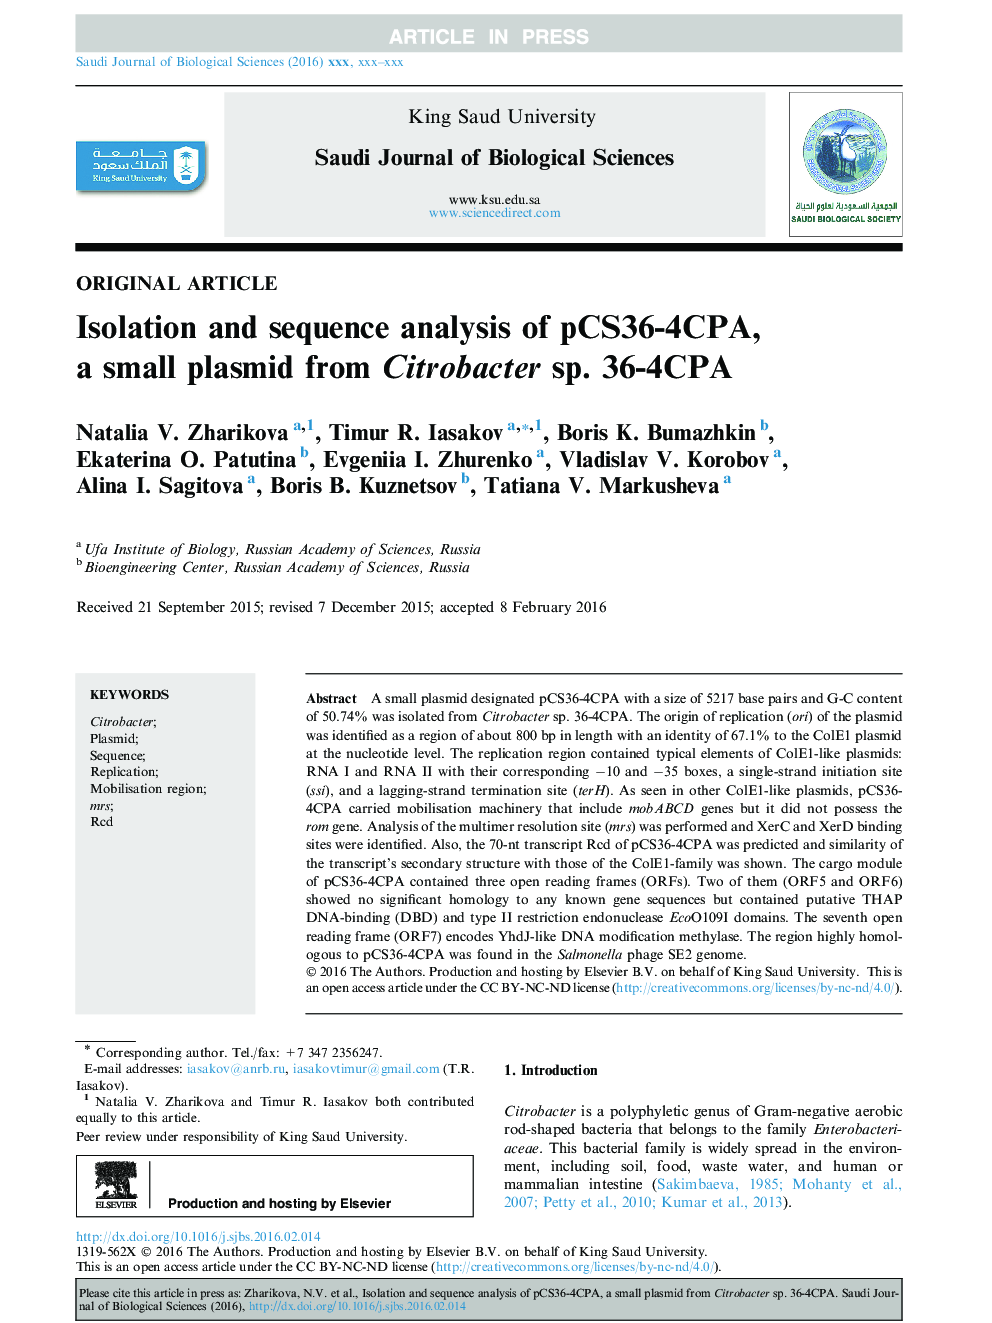 Isolation and sequence analysis of pCS36-4CPA, a small plasmid from Citrobacter sp. 36-4CPA